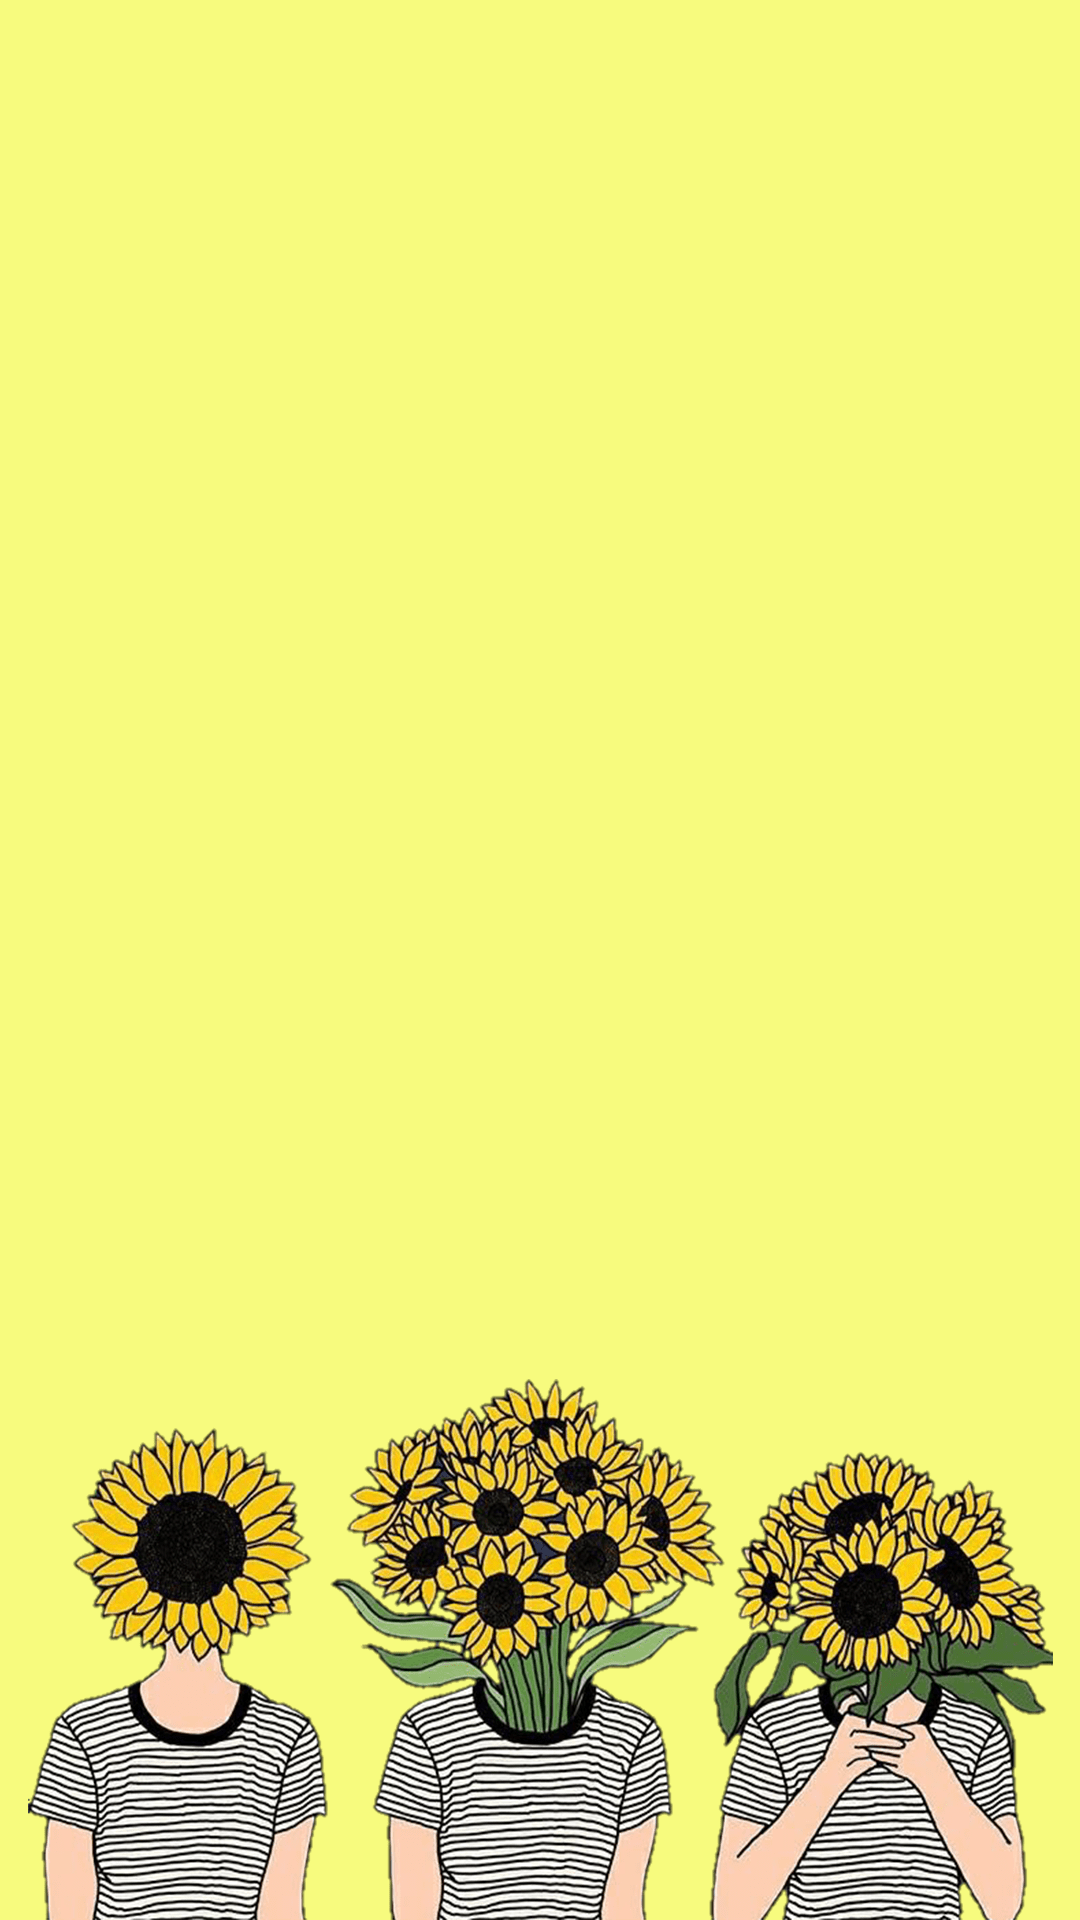 Aesthetic wallpaper for phone with sunflowers. - Yellow, light yellow, pastel yellow